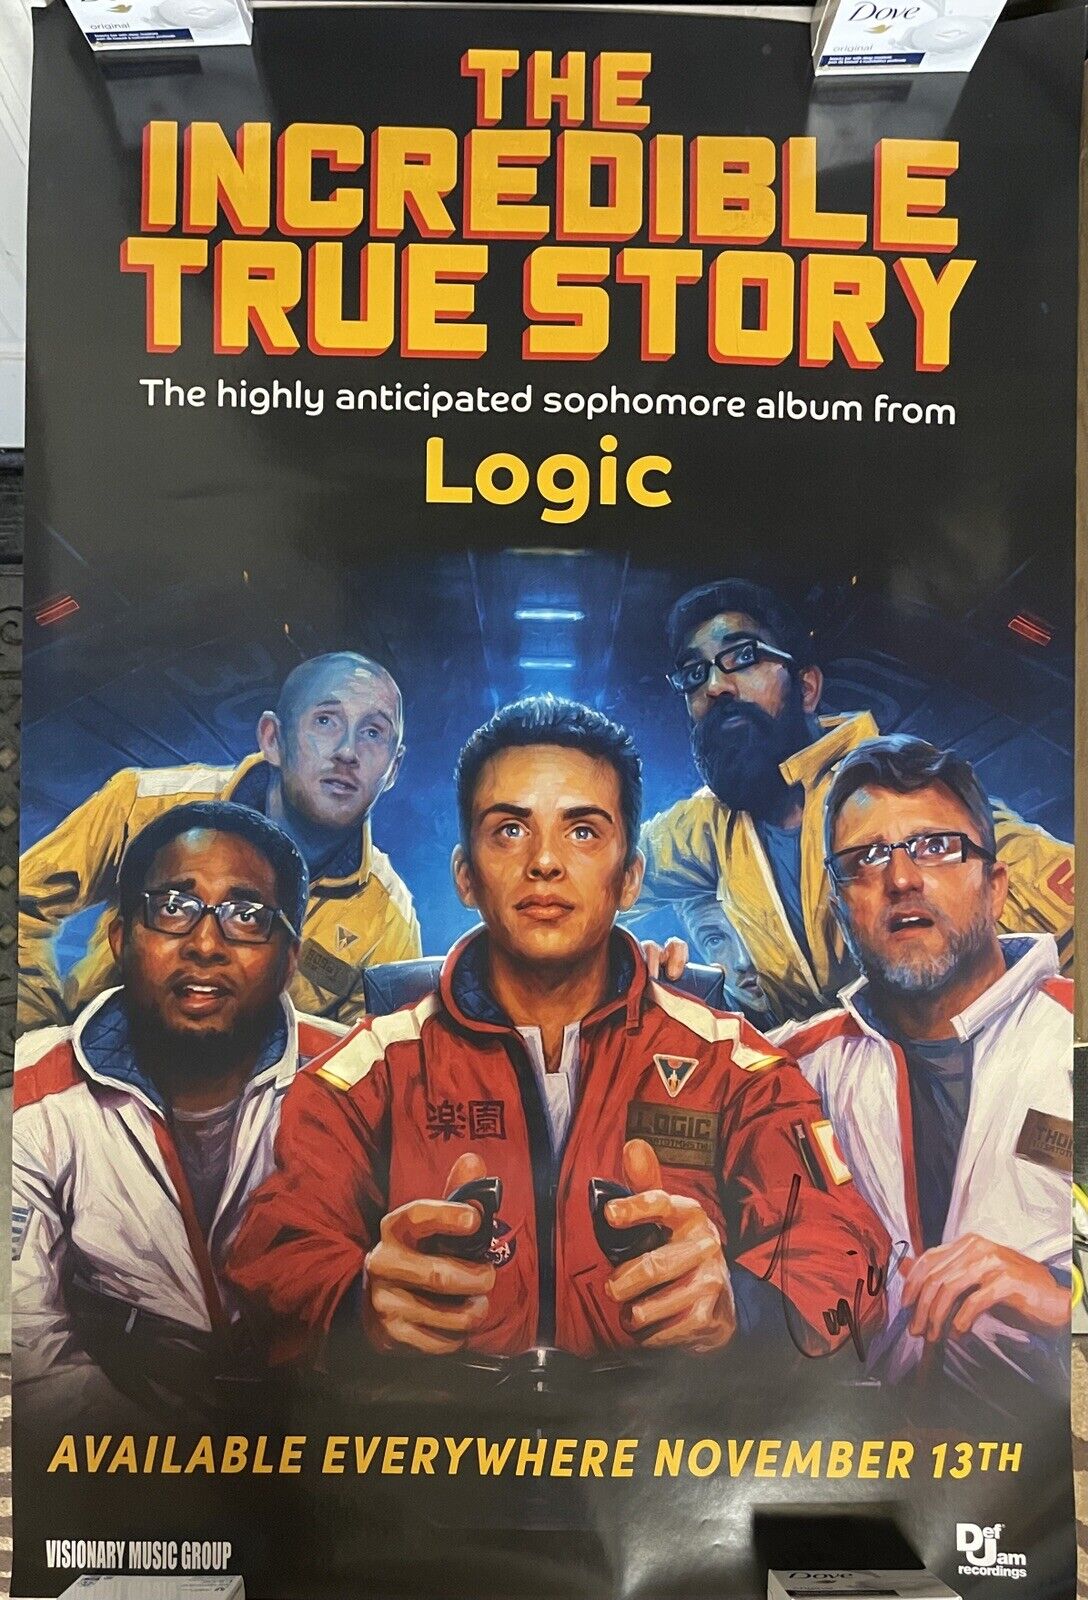 AUTOGRAPHED LOGIC Max 70% Seasonal Wrap Introduction OFF Signed RARE POSTER THE TRUE INCREDIBLE STORY